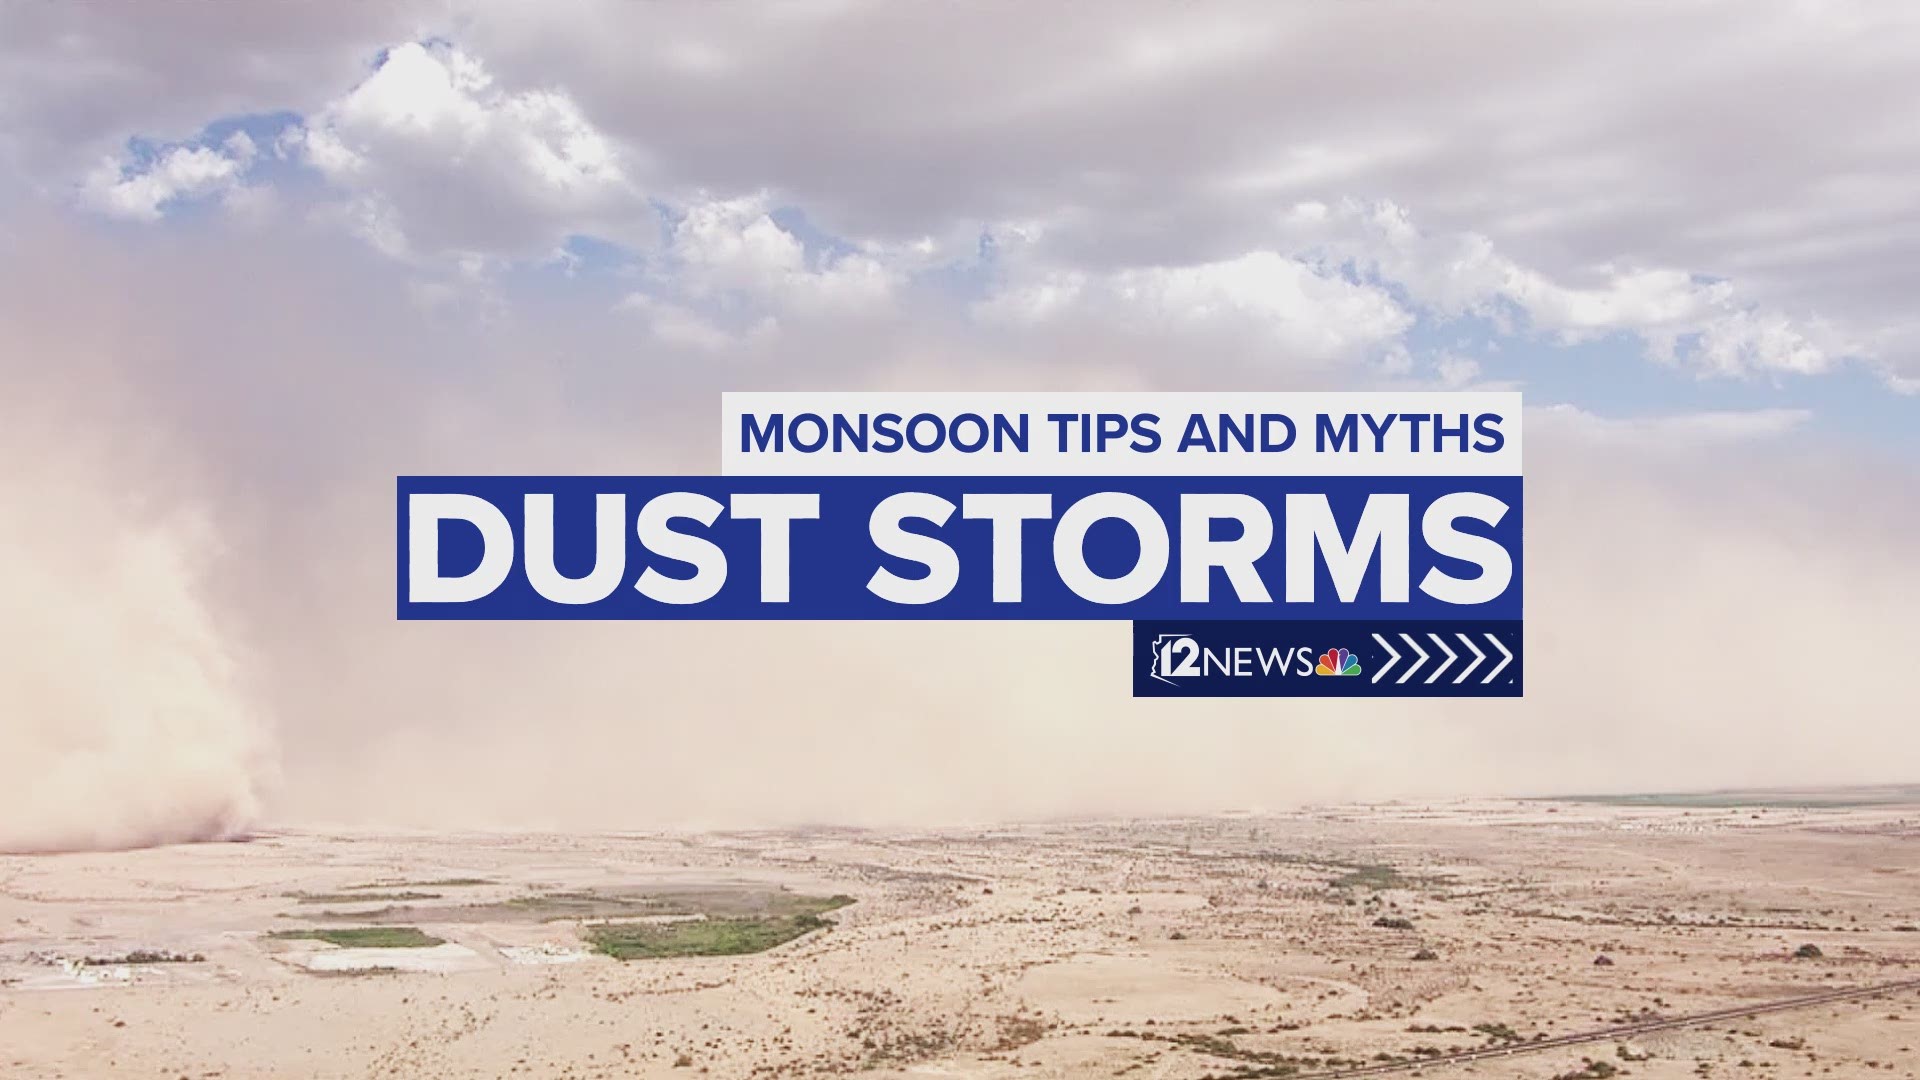 Lindsay Riley talks about a few monsoon myths and tips, including some facts about dust storms.